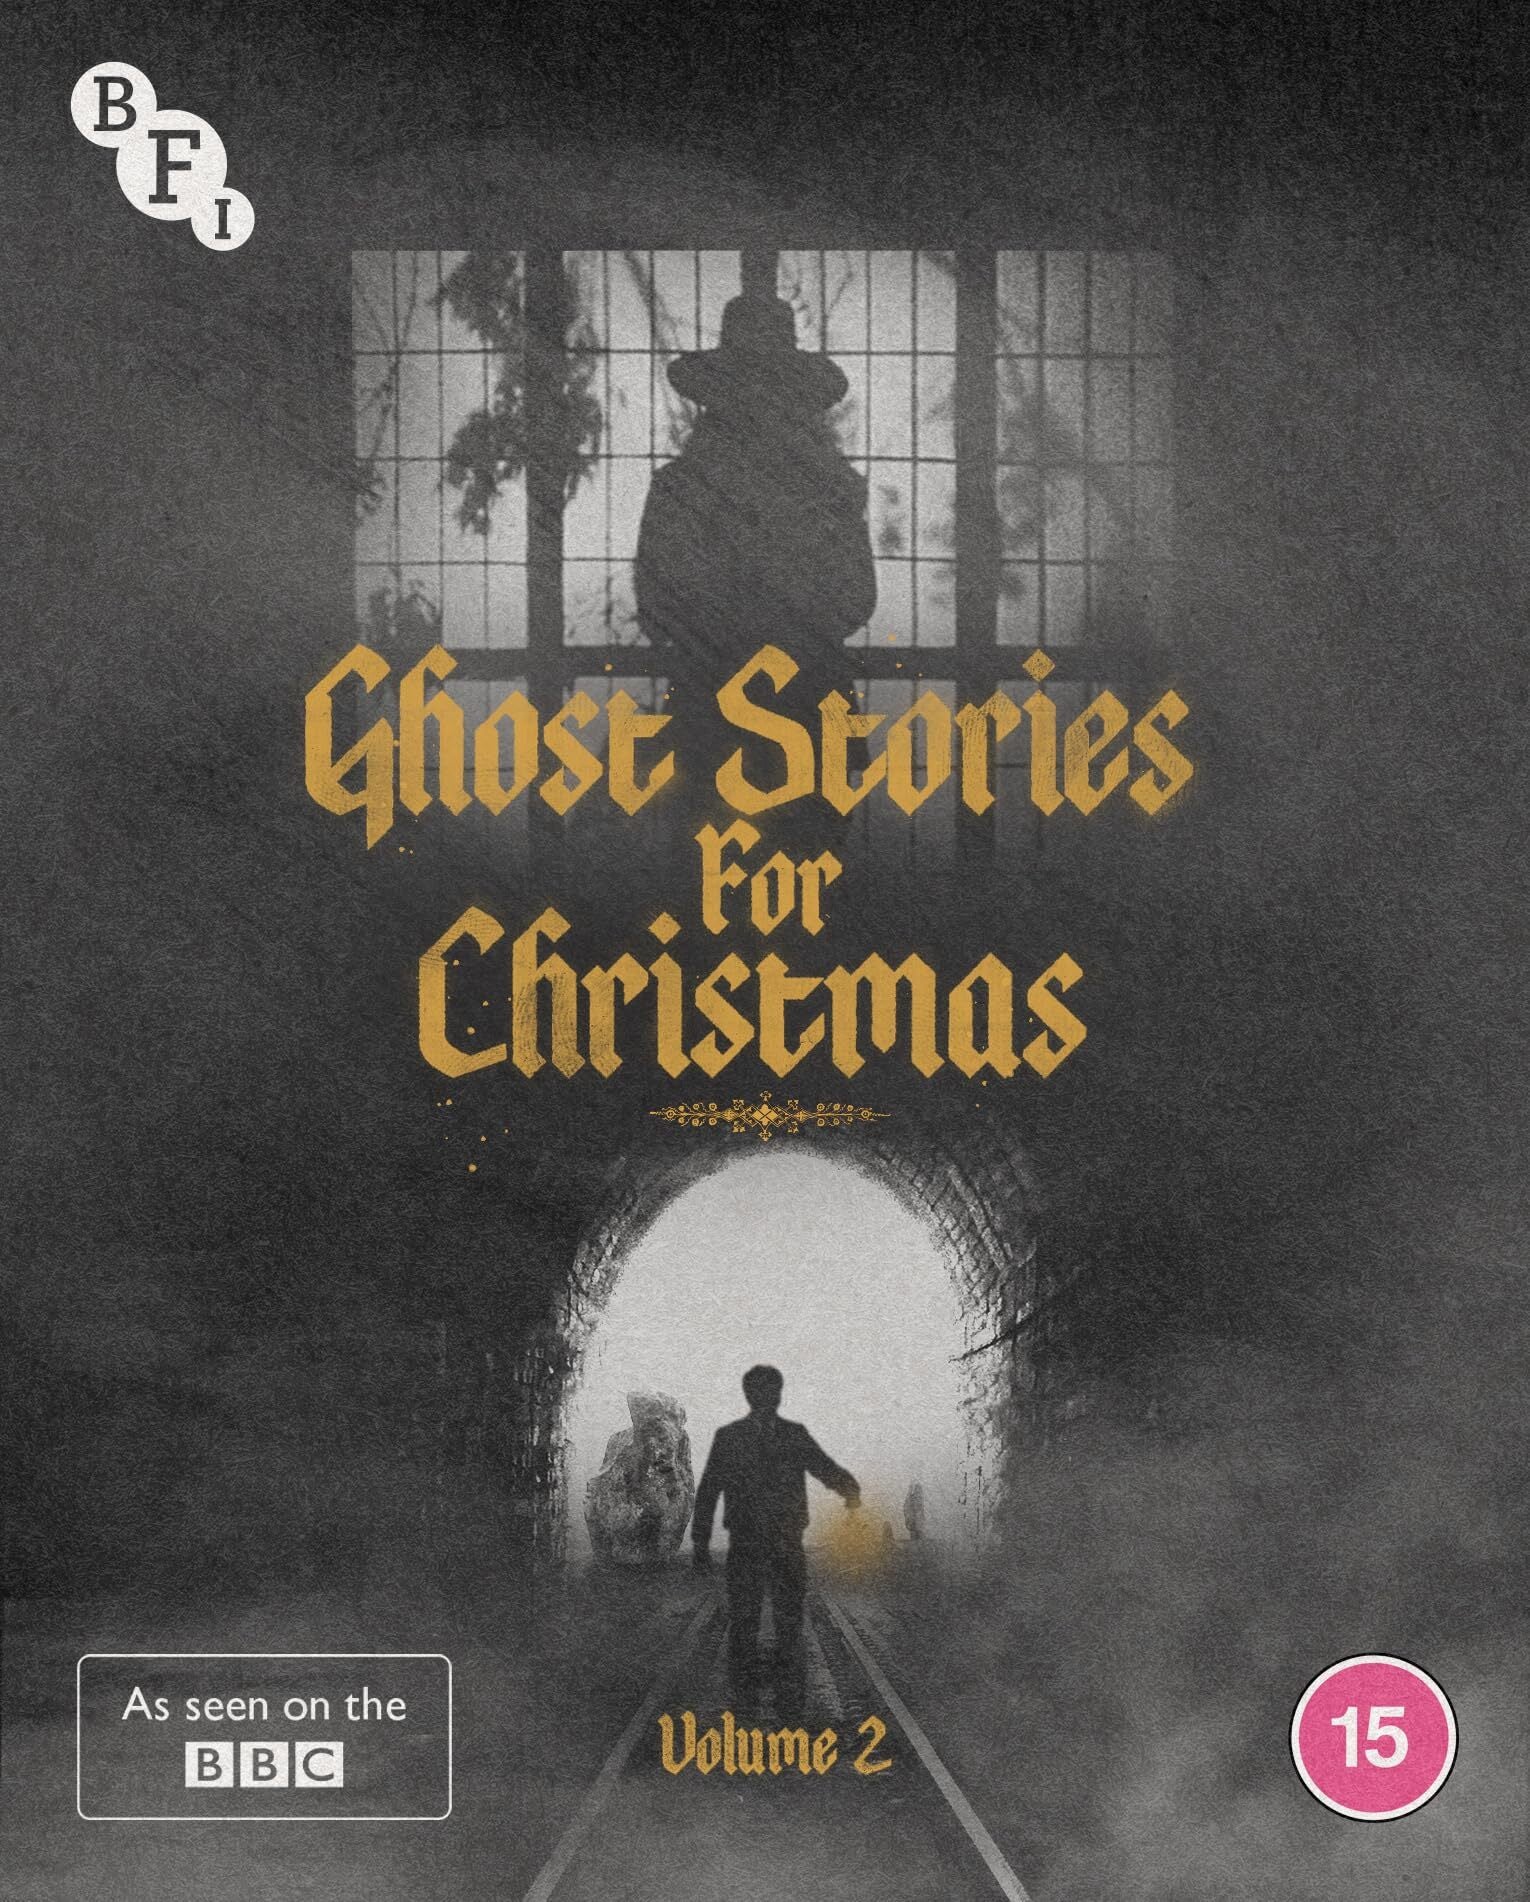 GHOST STORIES FOR CHRISTMAS VOLUME 2 (REGION B IMPORT) BLU-RAY